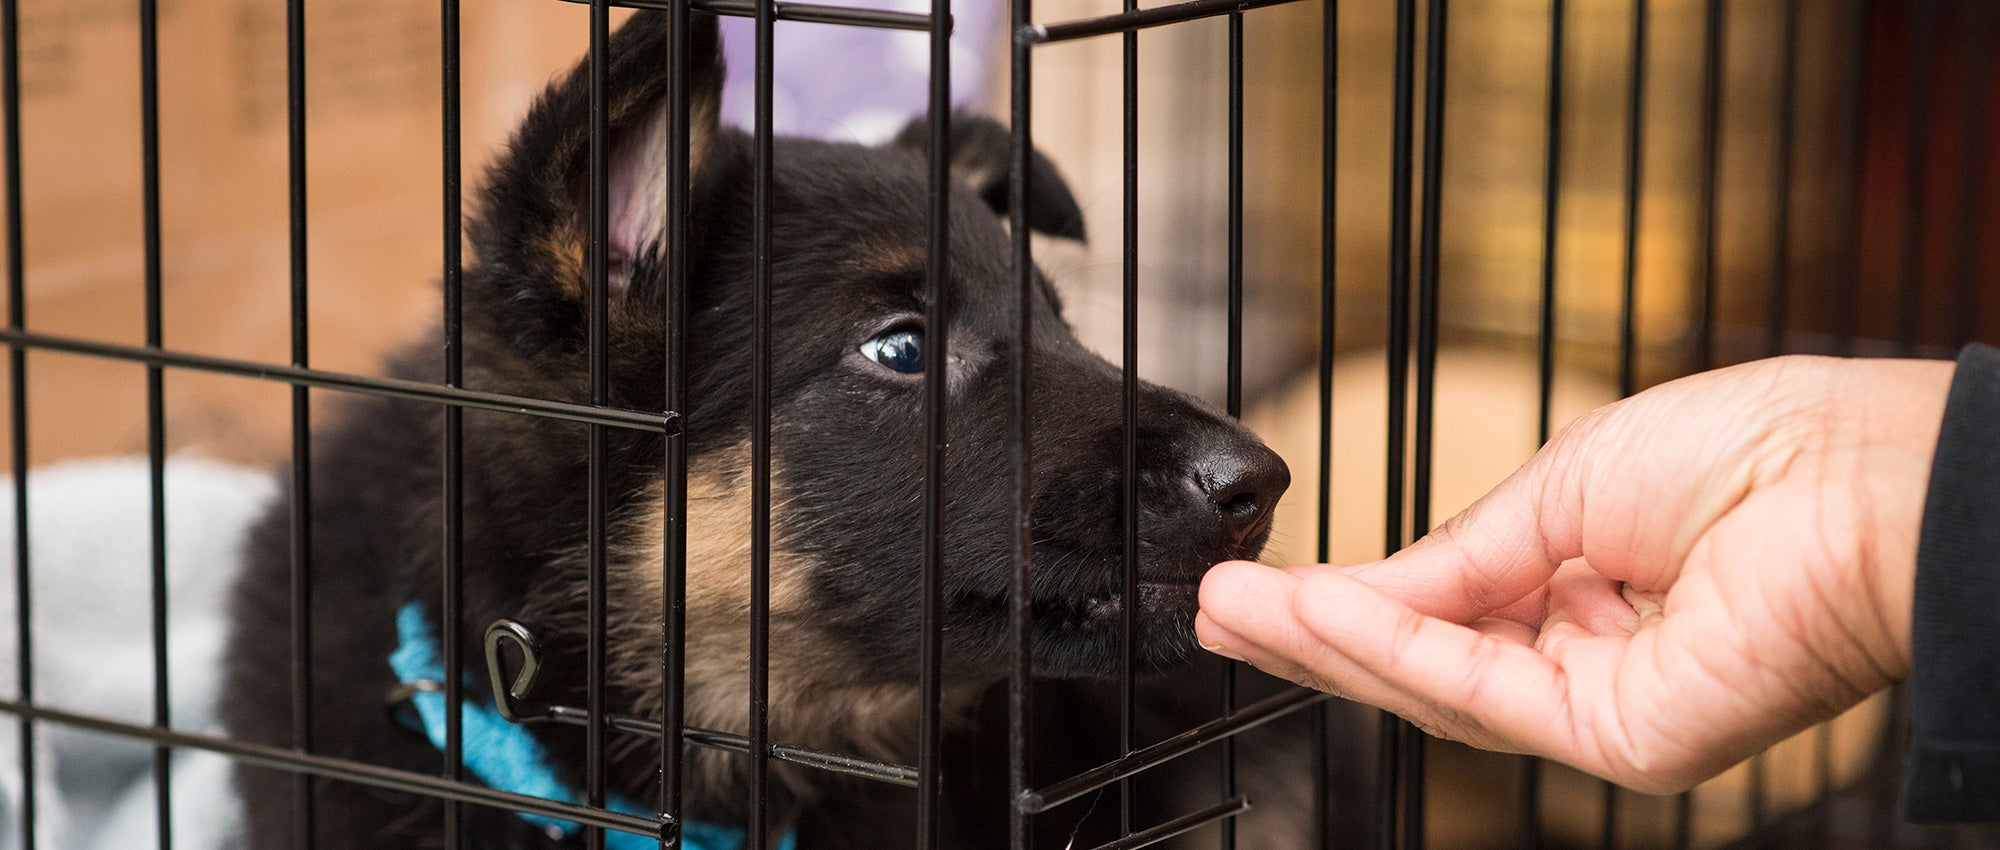 How to crate train a dog or puppy| The Humane Society of the United States